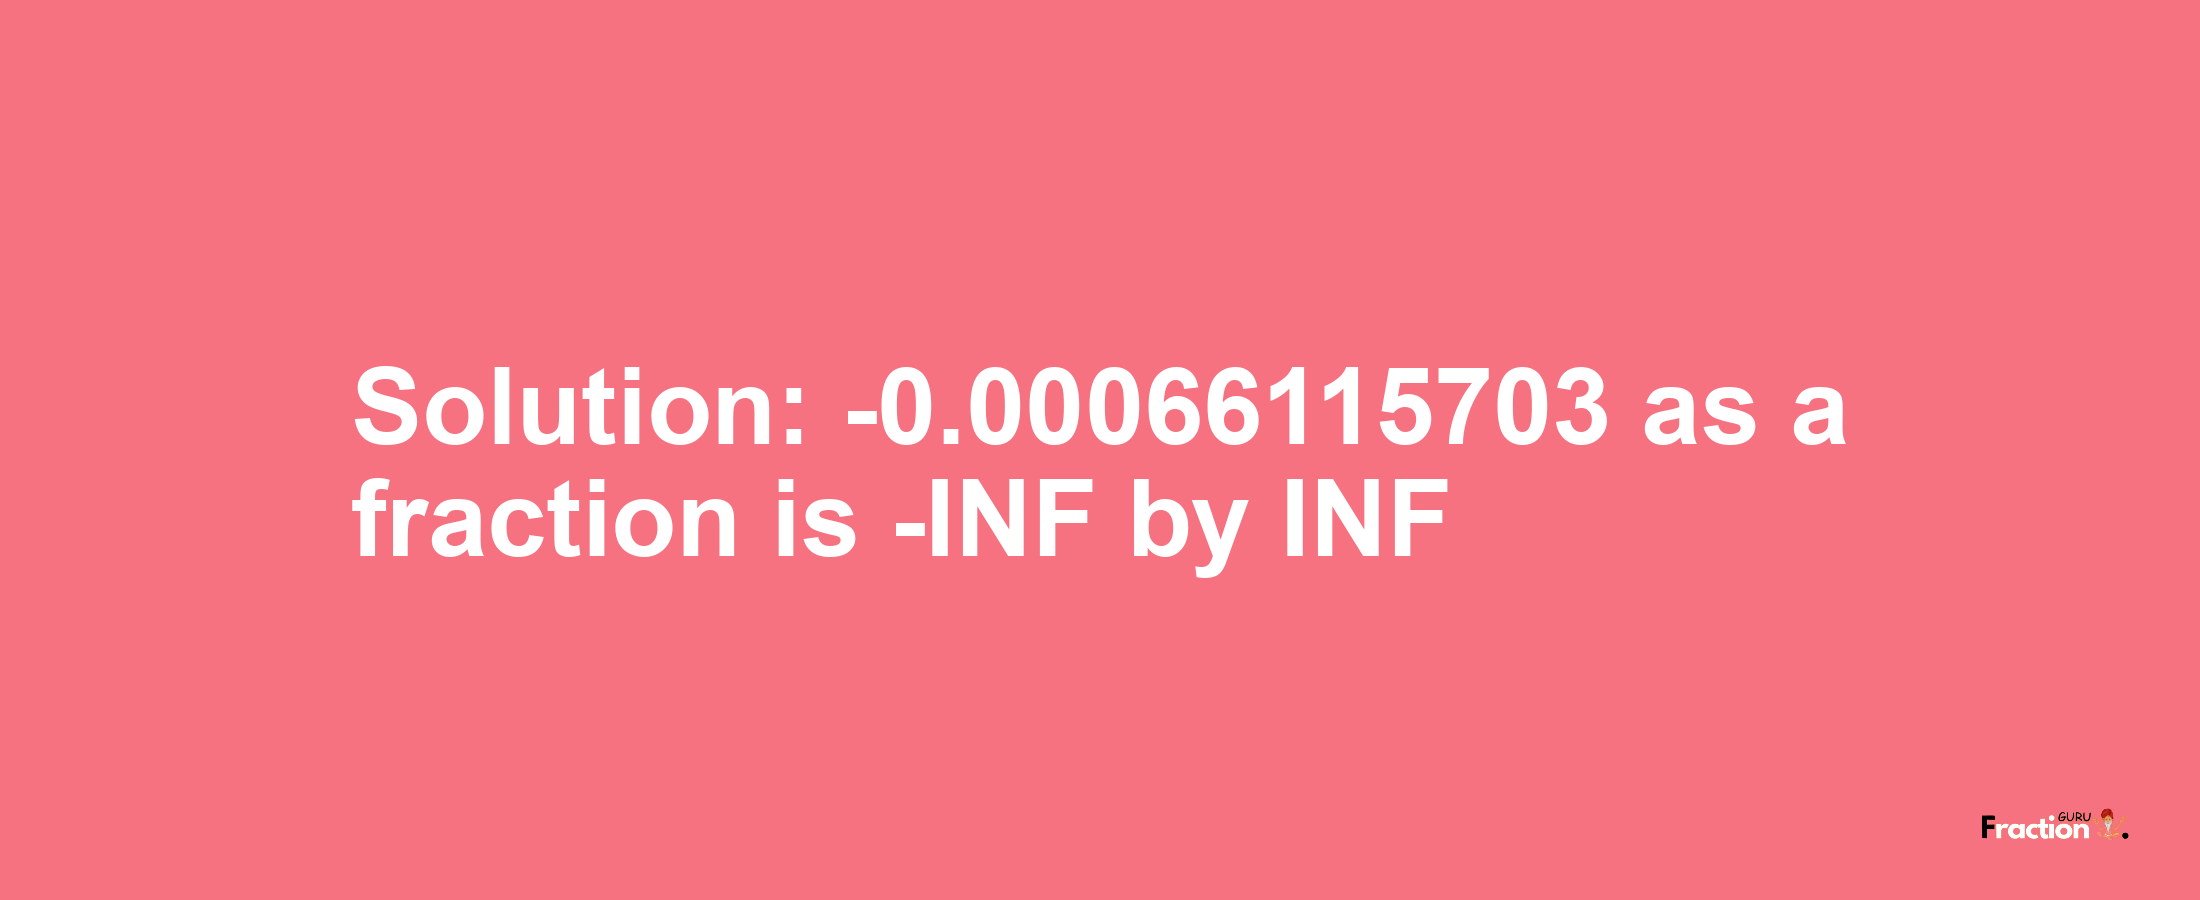 Solution:-0.00066115703 as a fraction is -INF/INF